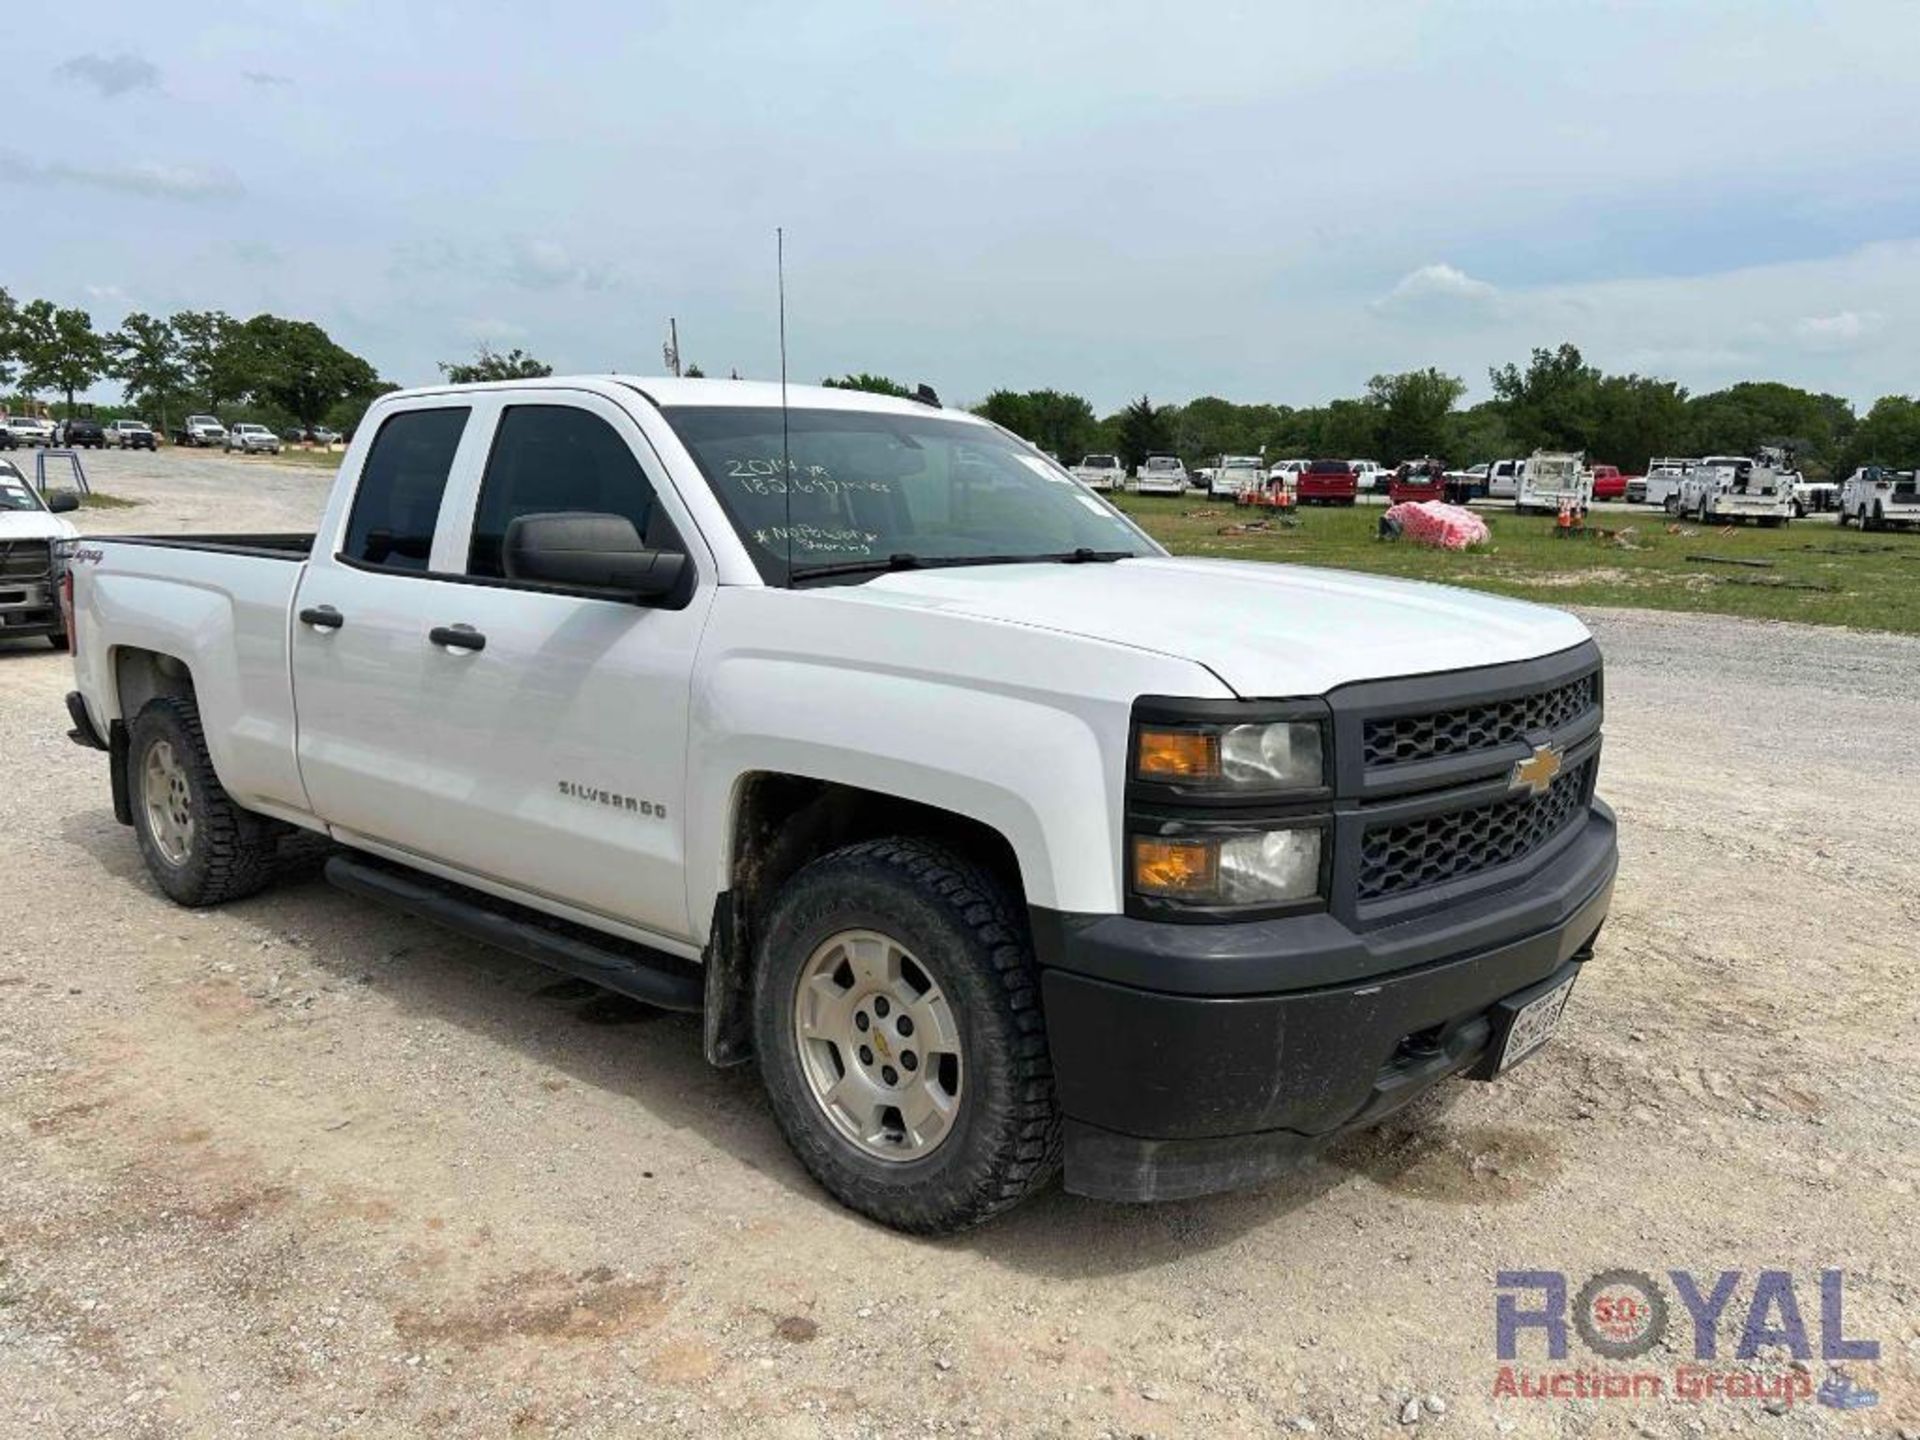 2014 Chevrolet Silverado 4x4 Extended Cab Pickup Truck - Image 2 of 34